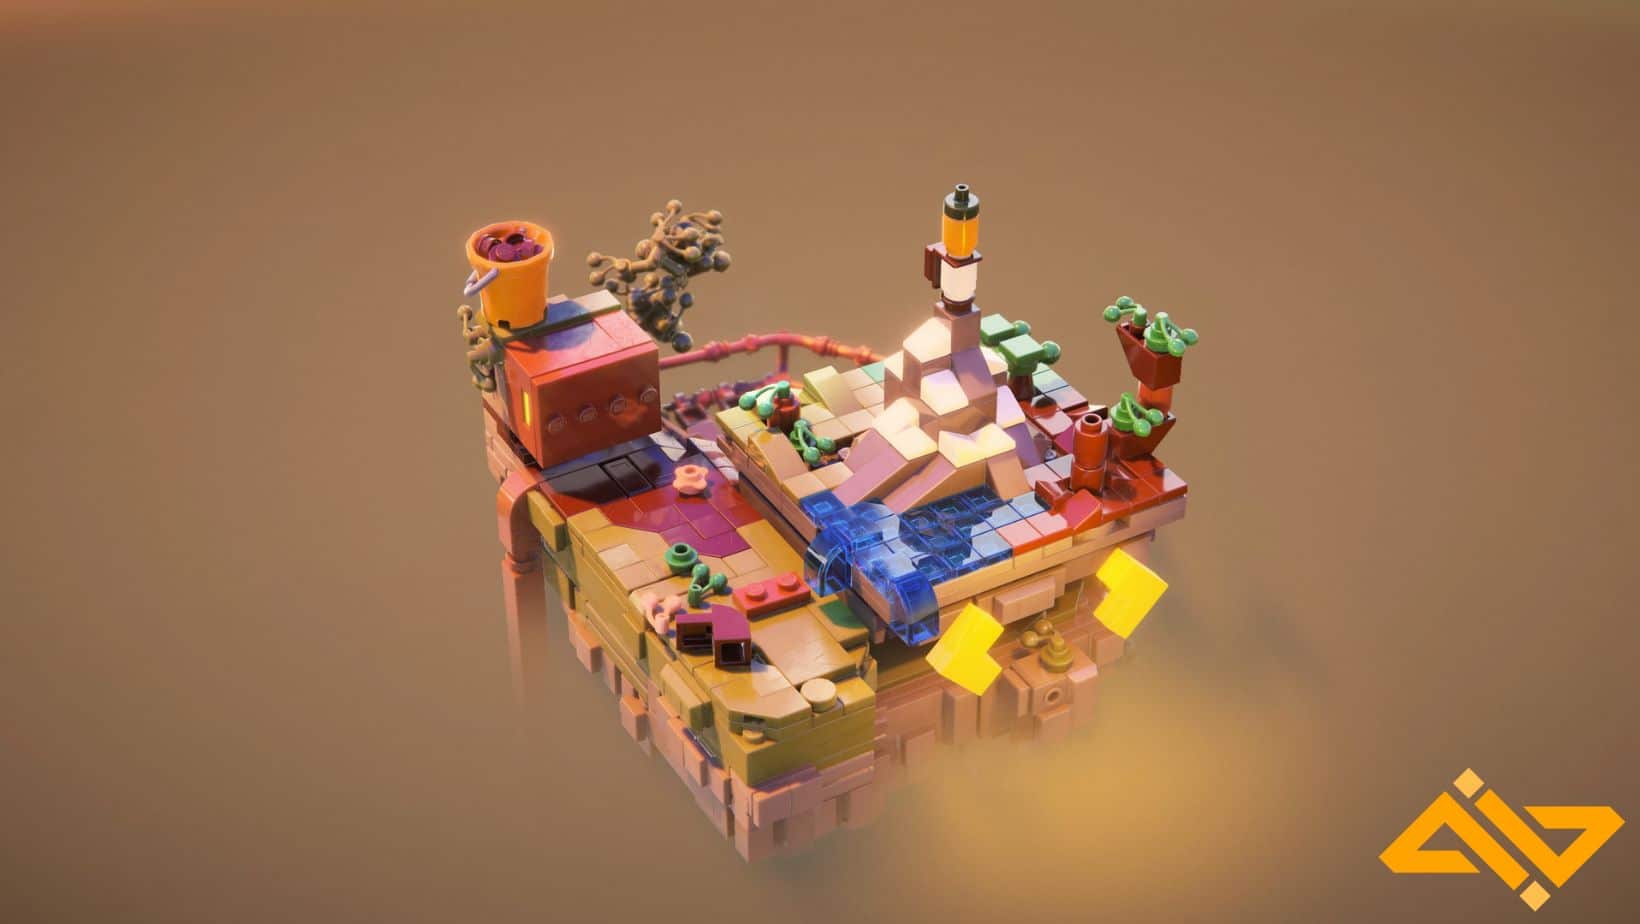 Lego Builder's Journey is an atmospheric, geometric puzzle game that looks stunning.